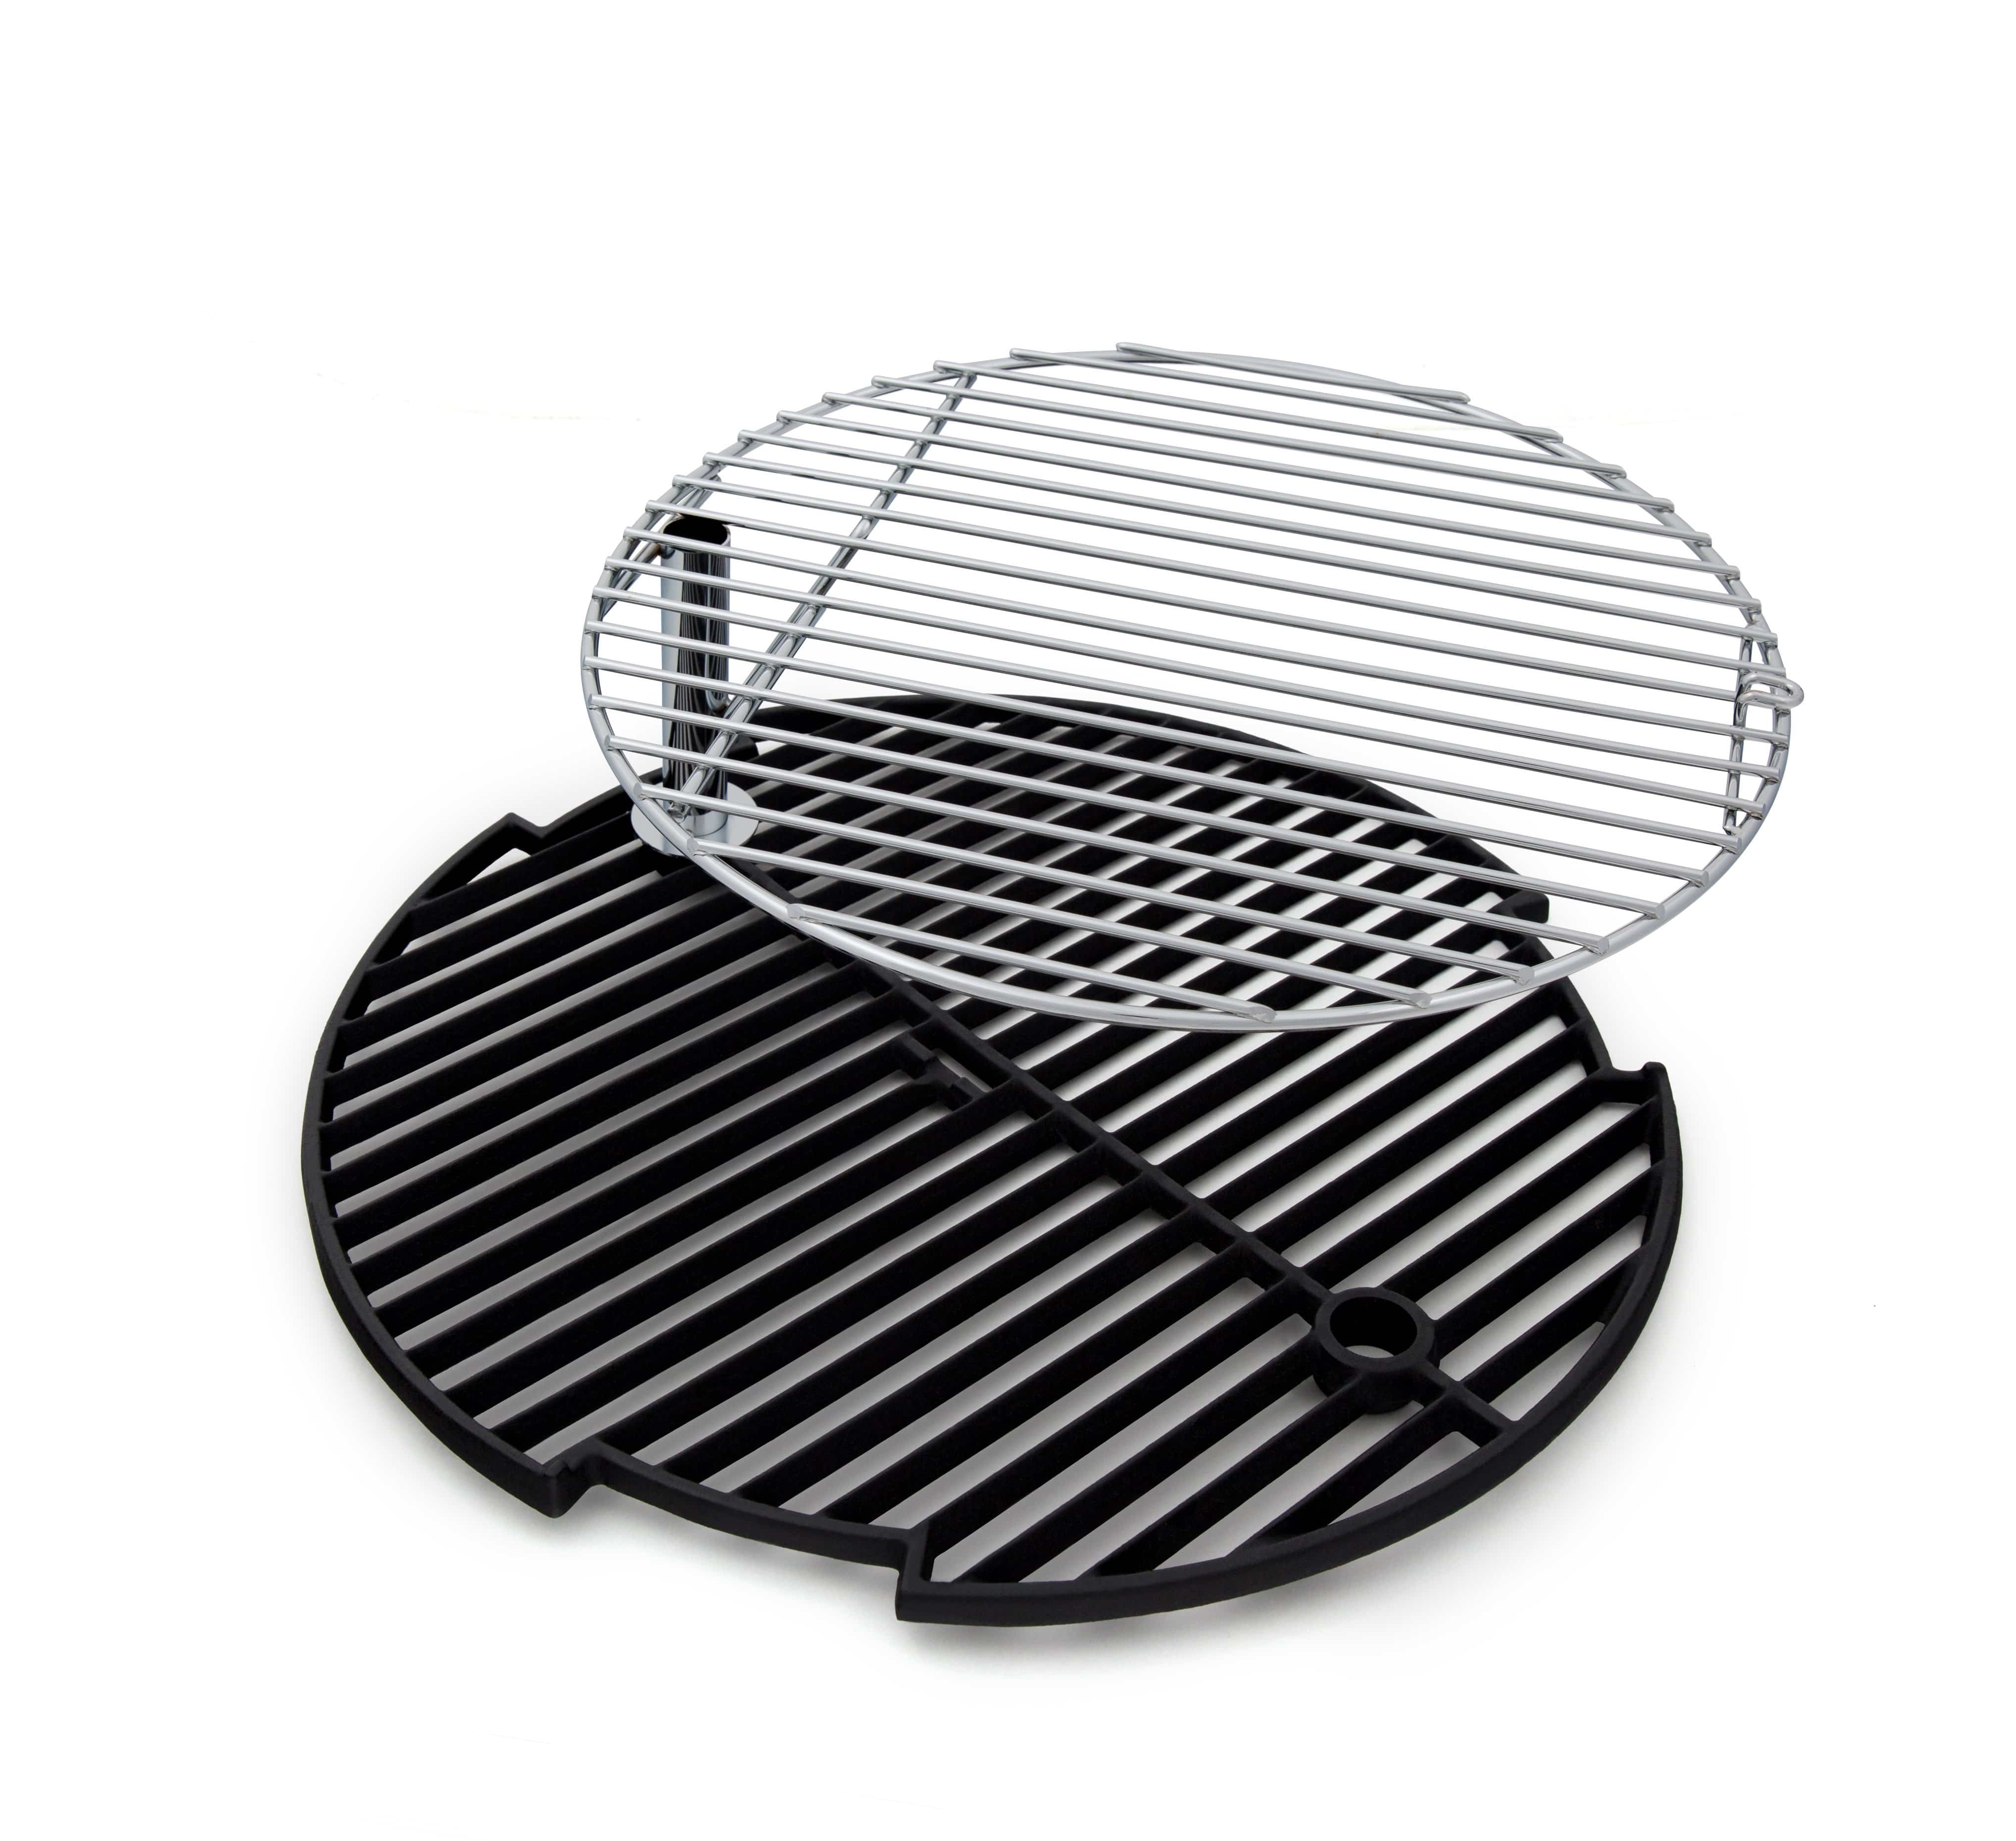 Broil King Broil King Accessories KEG - COOKING GRATE SET- CAST IRON